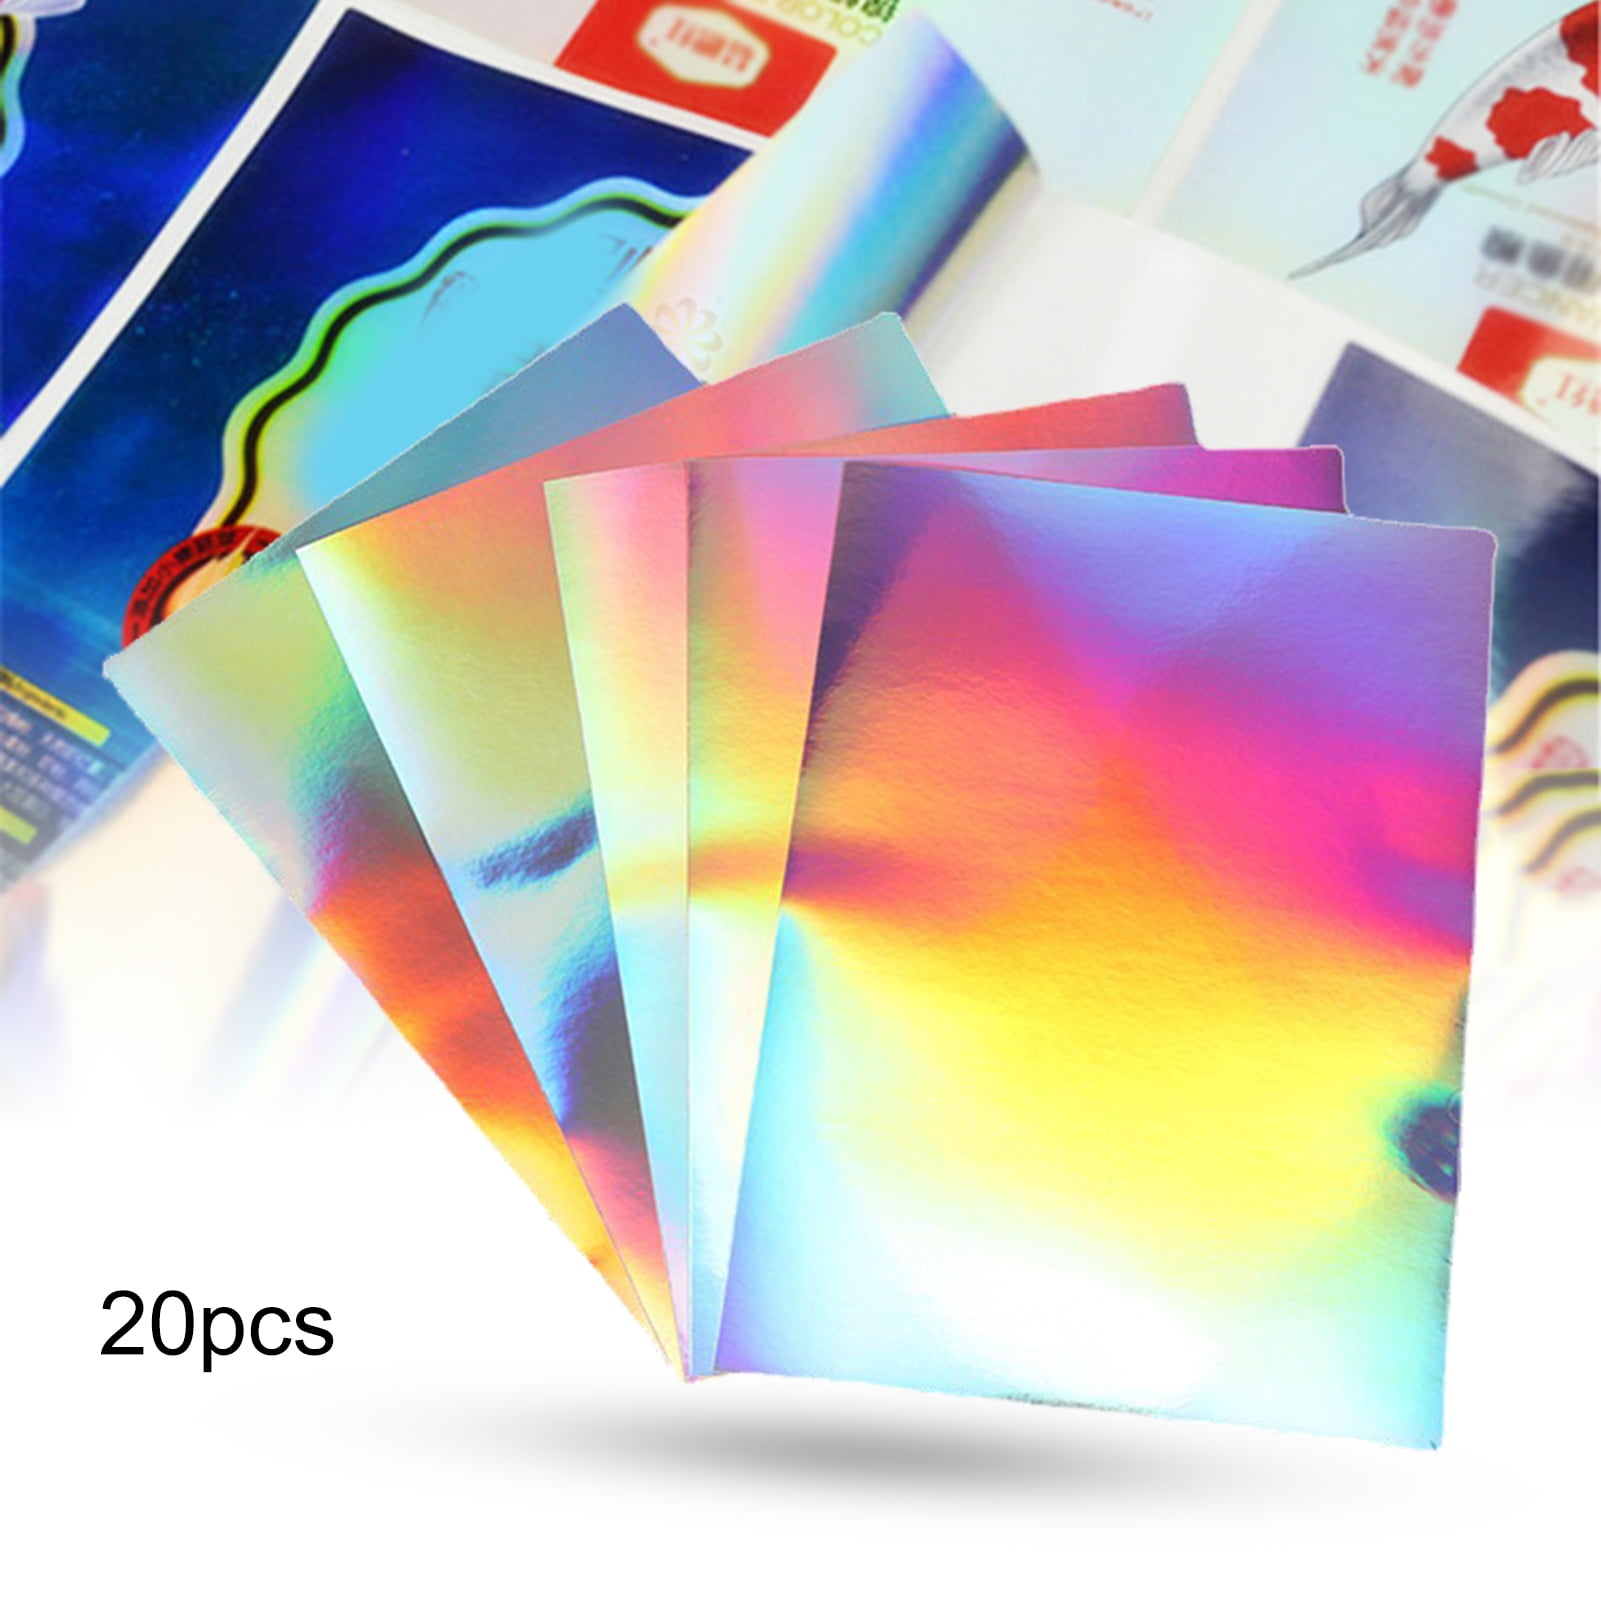 Self adhesive vinyl sticky back 7 sheets A4 RAINBOW COLOURS BUY 2 GET 3RD FREE 